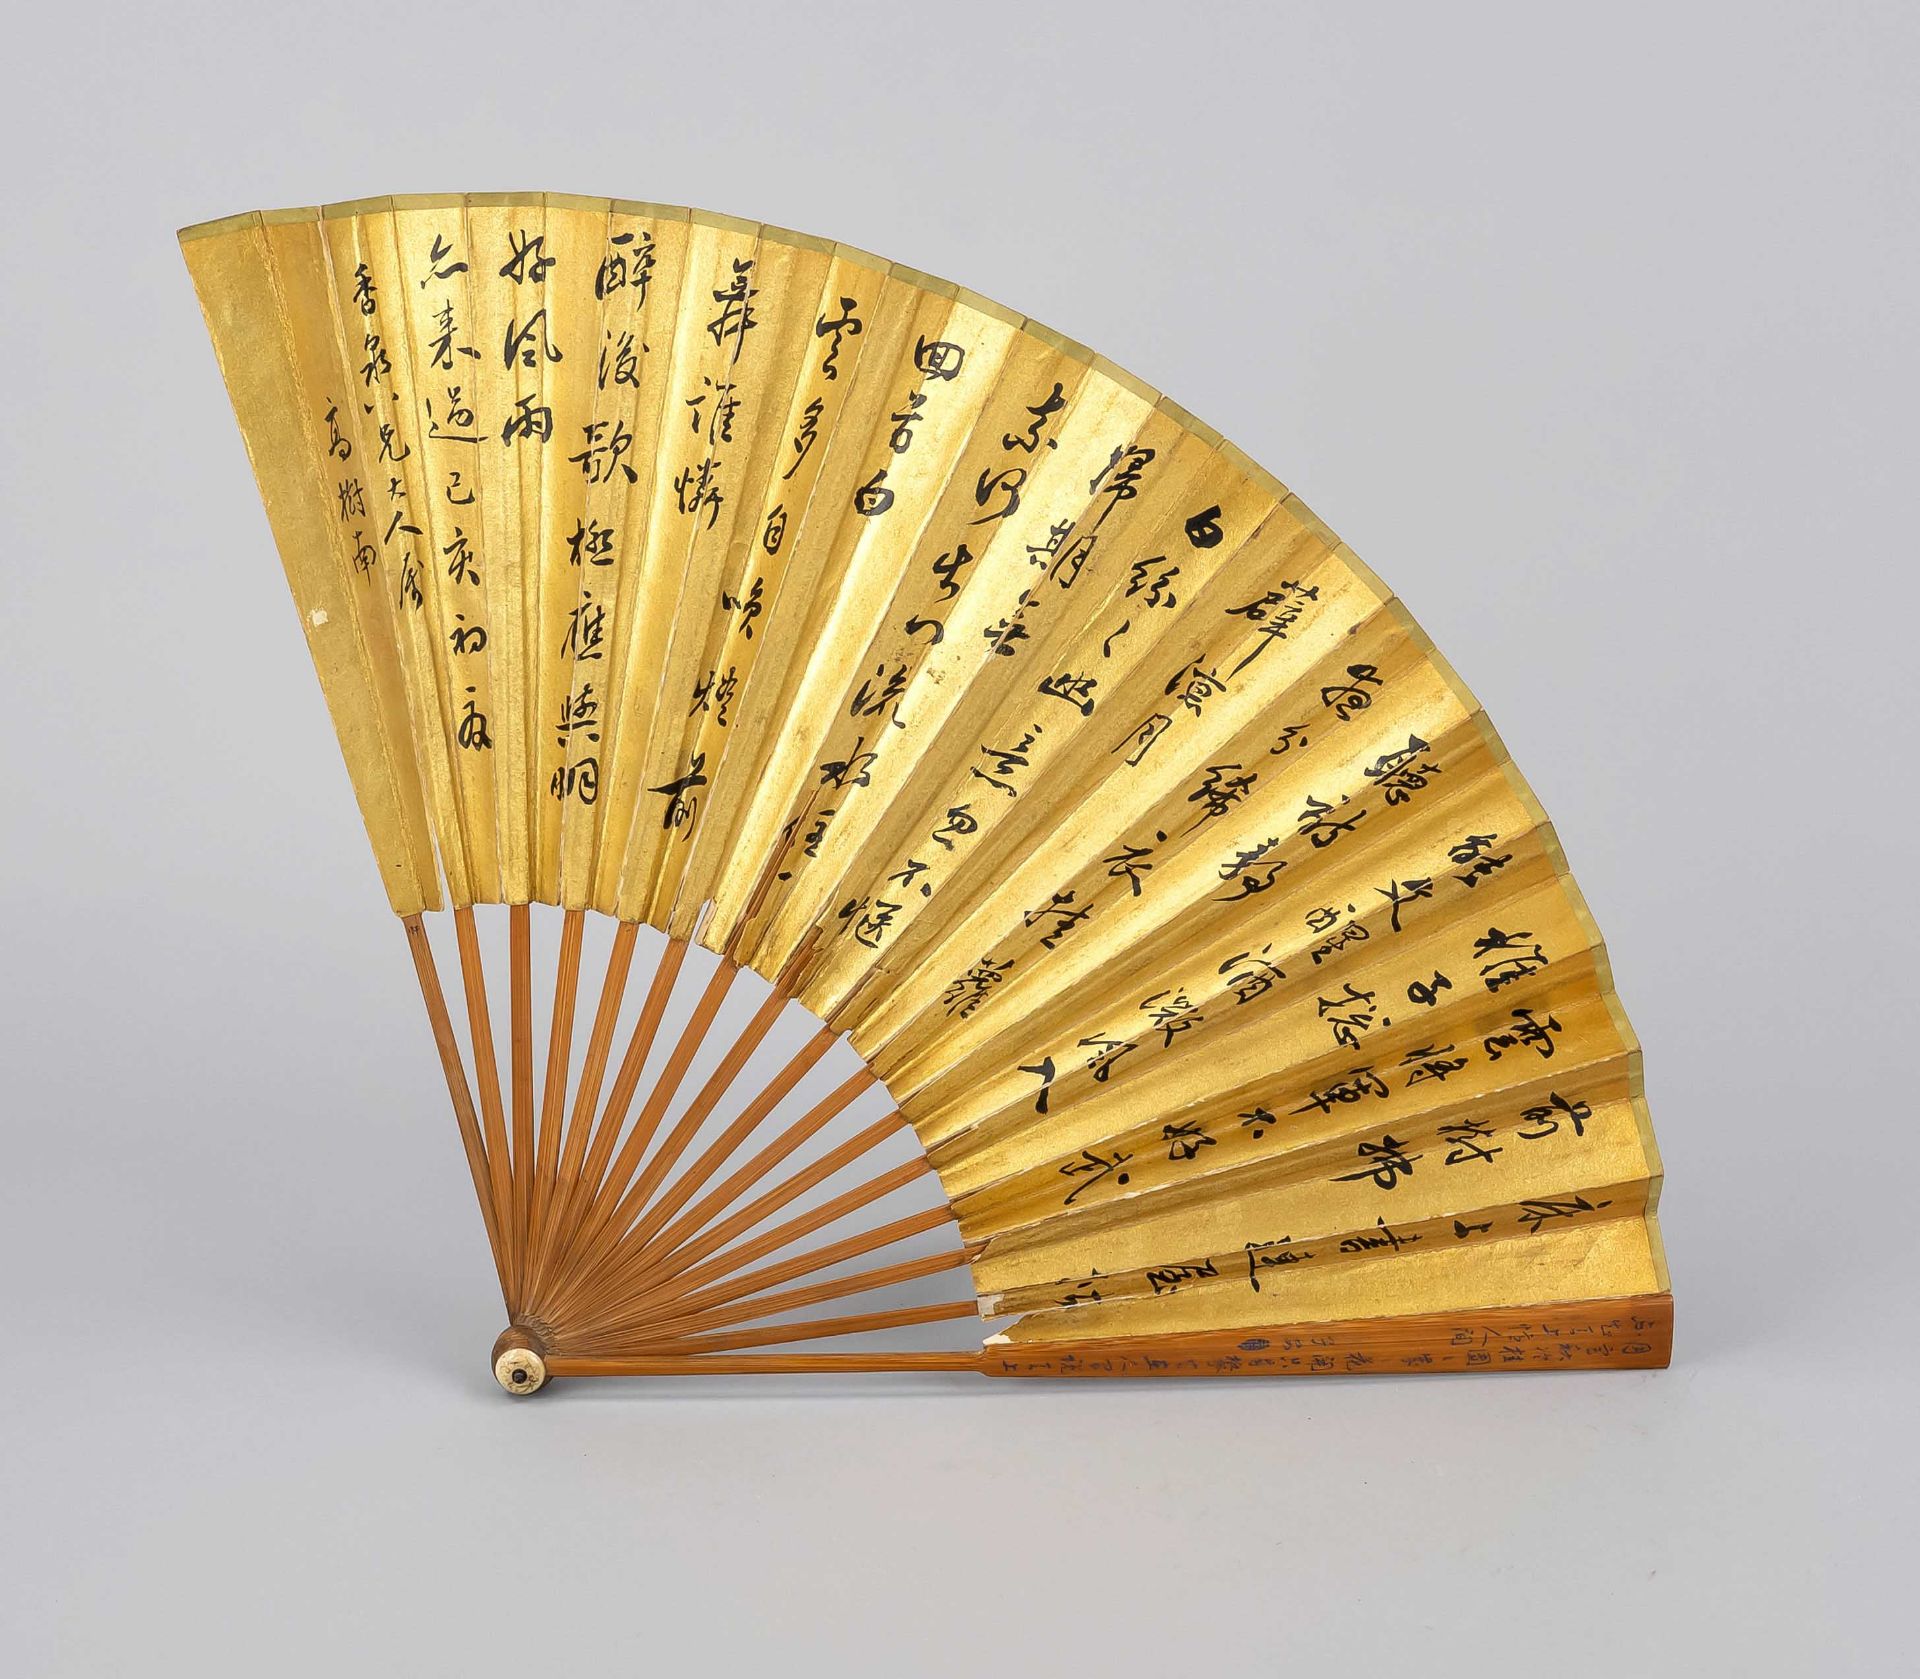 Painted fan ''Kranichpaar im Kiefernwalde'', China, 20th c., ink, colors and gold paint on paper - Image 2 of 2